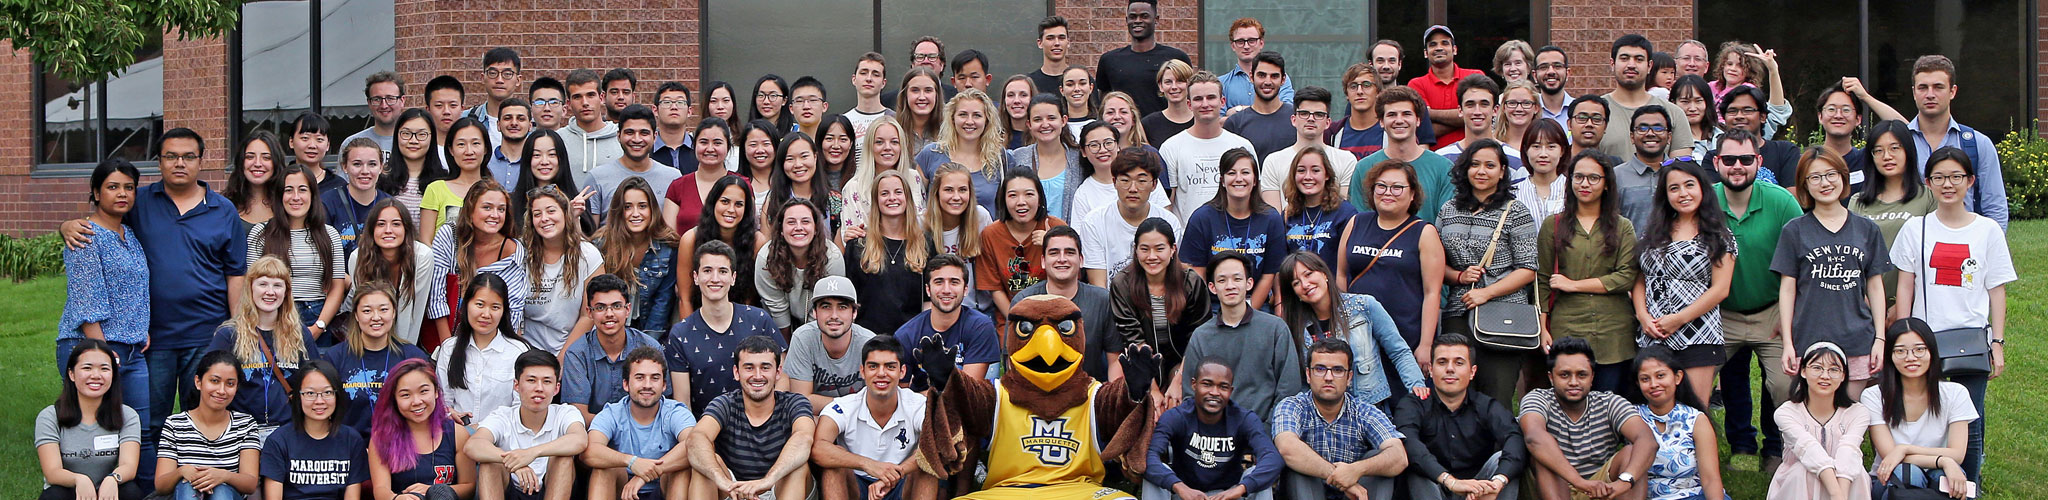 International students at Marquette